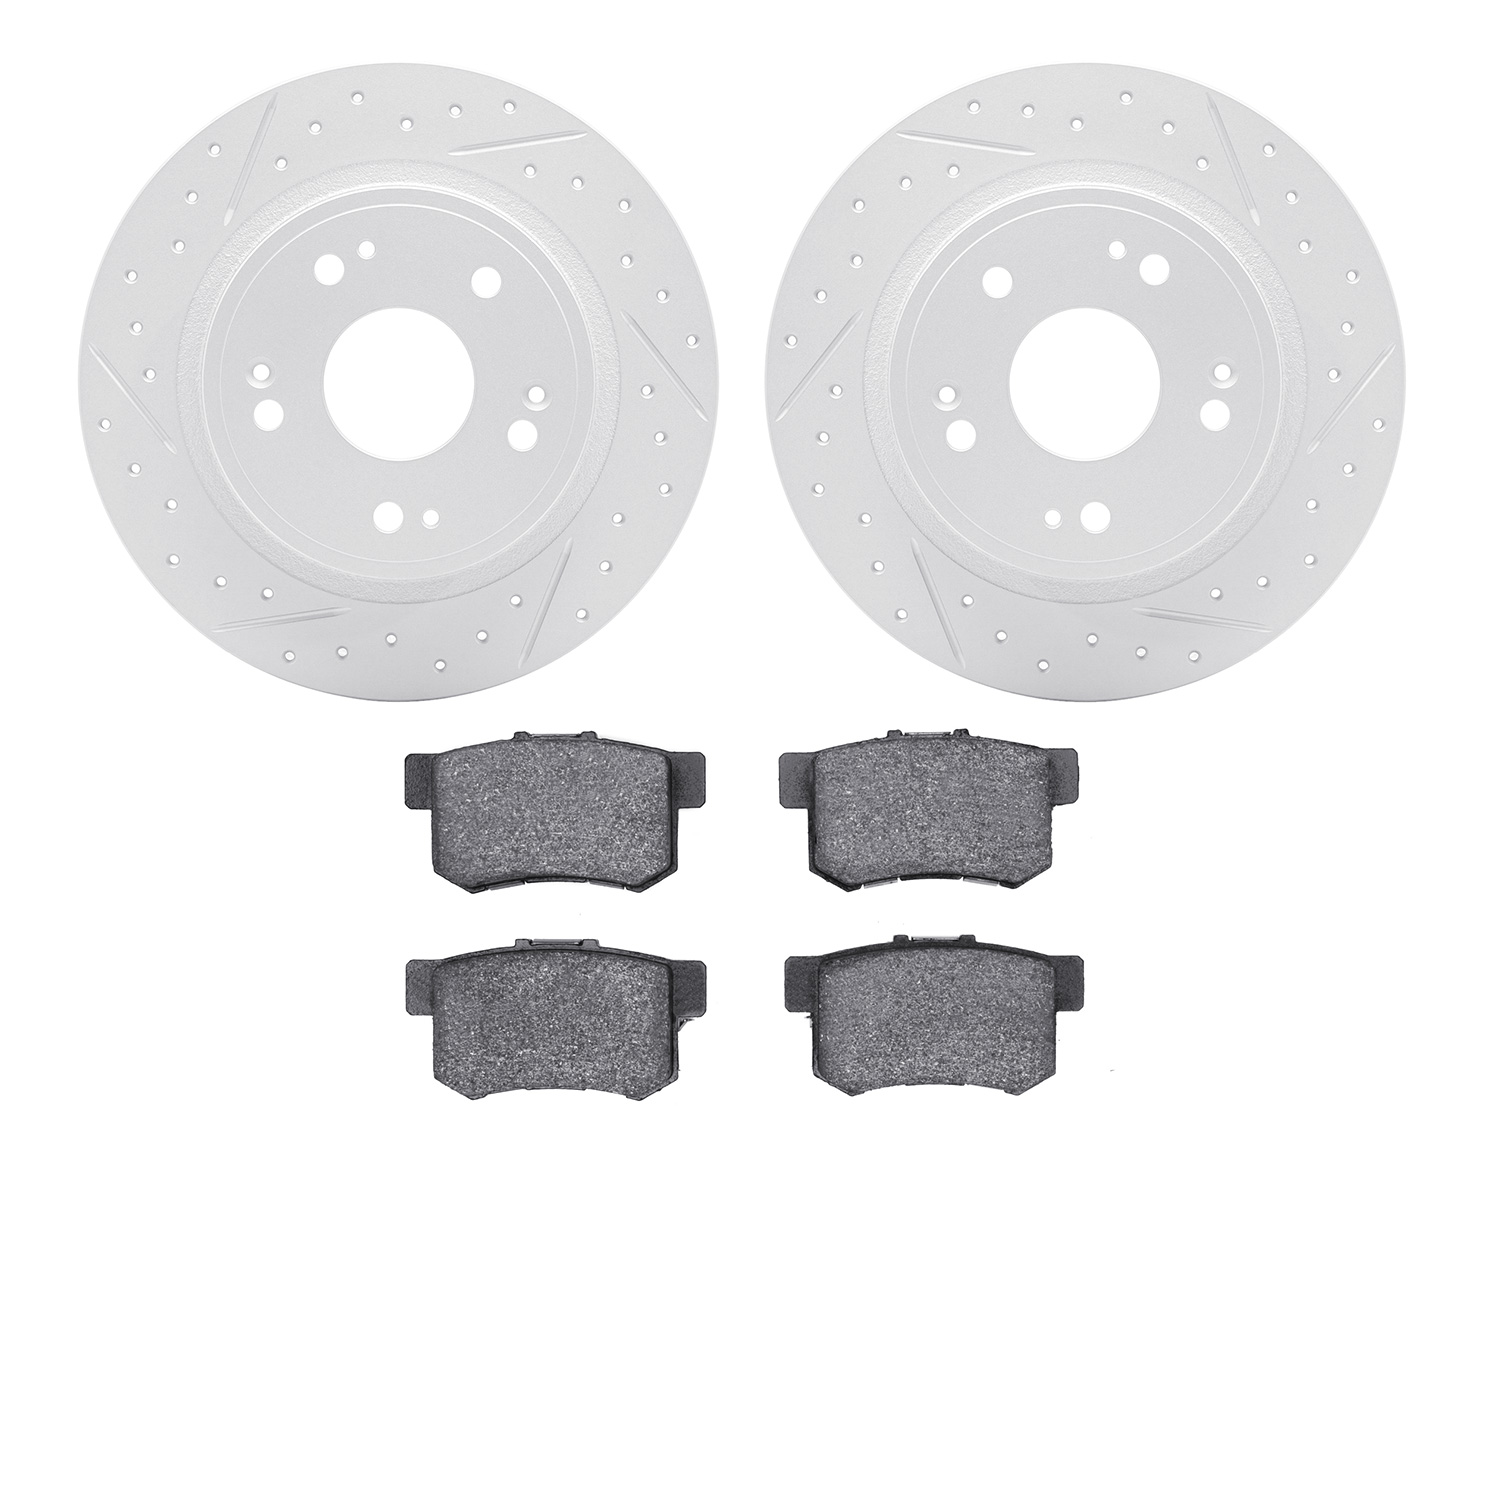 2502-59031 Geoperformance Drilled/Slotted Rotors w/5000 Advanced Brake Pads Kit, Fits Select Acura/Honda, Position: Rear